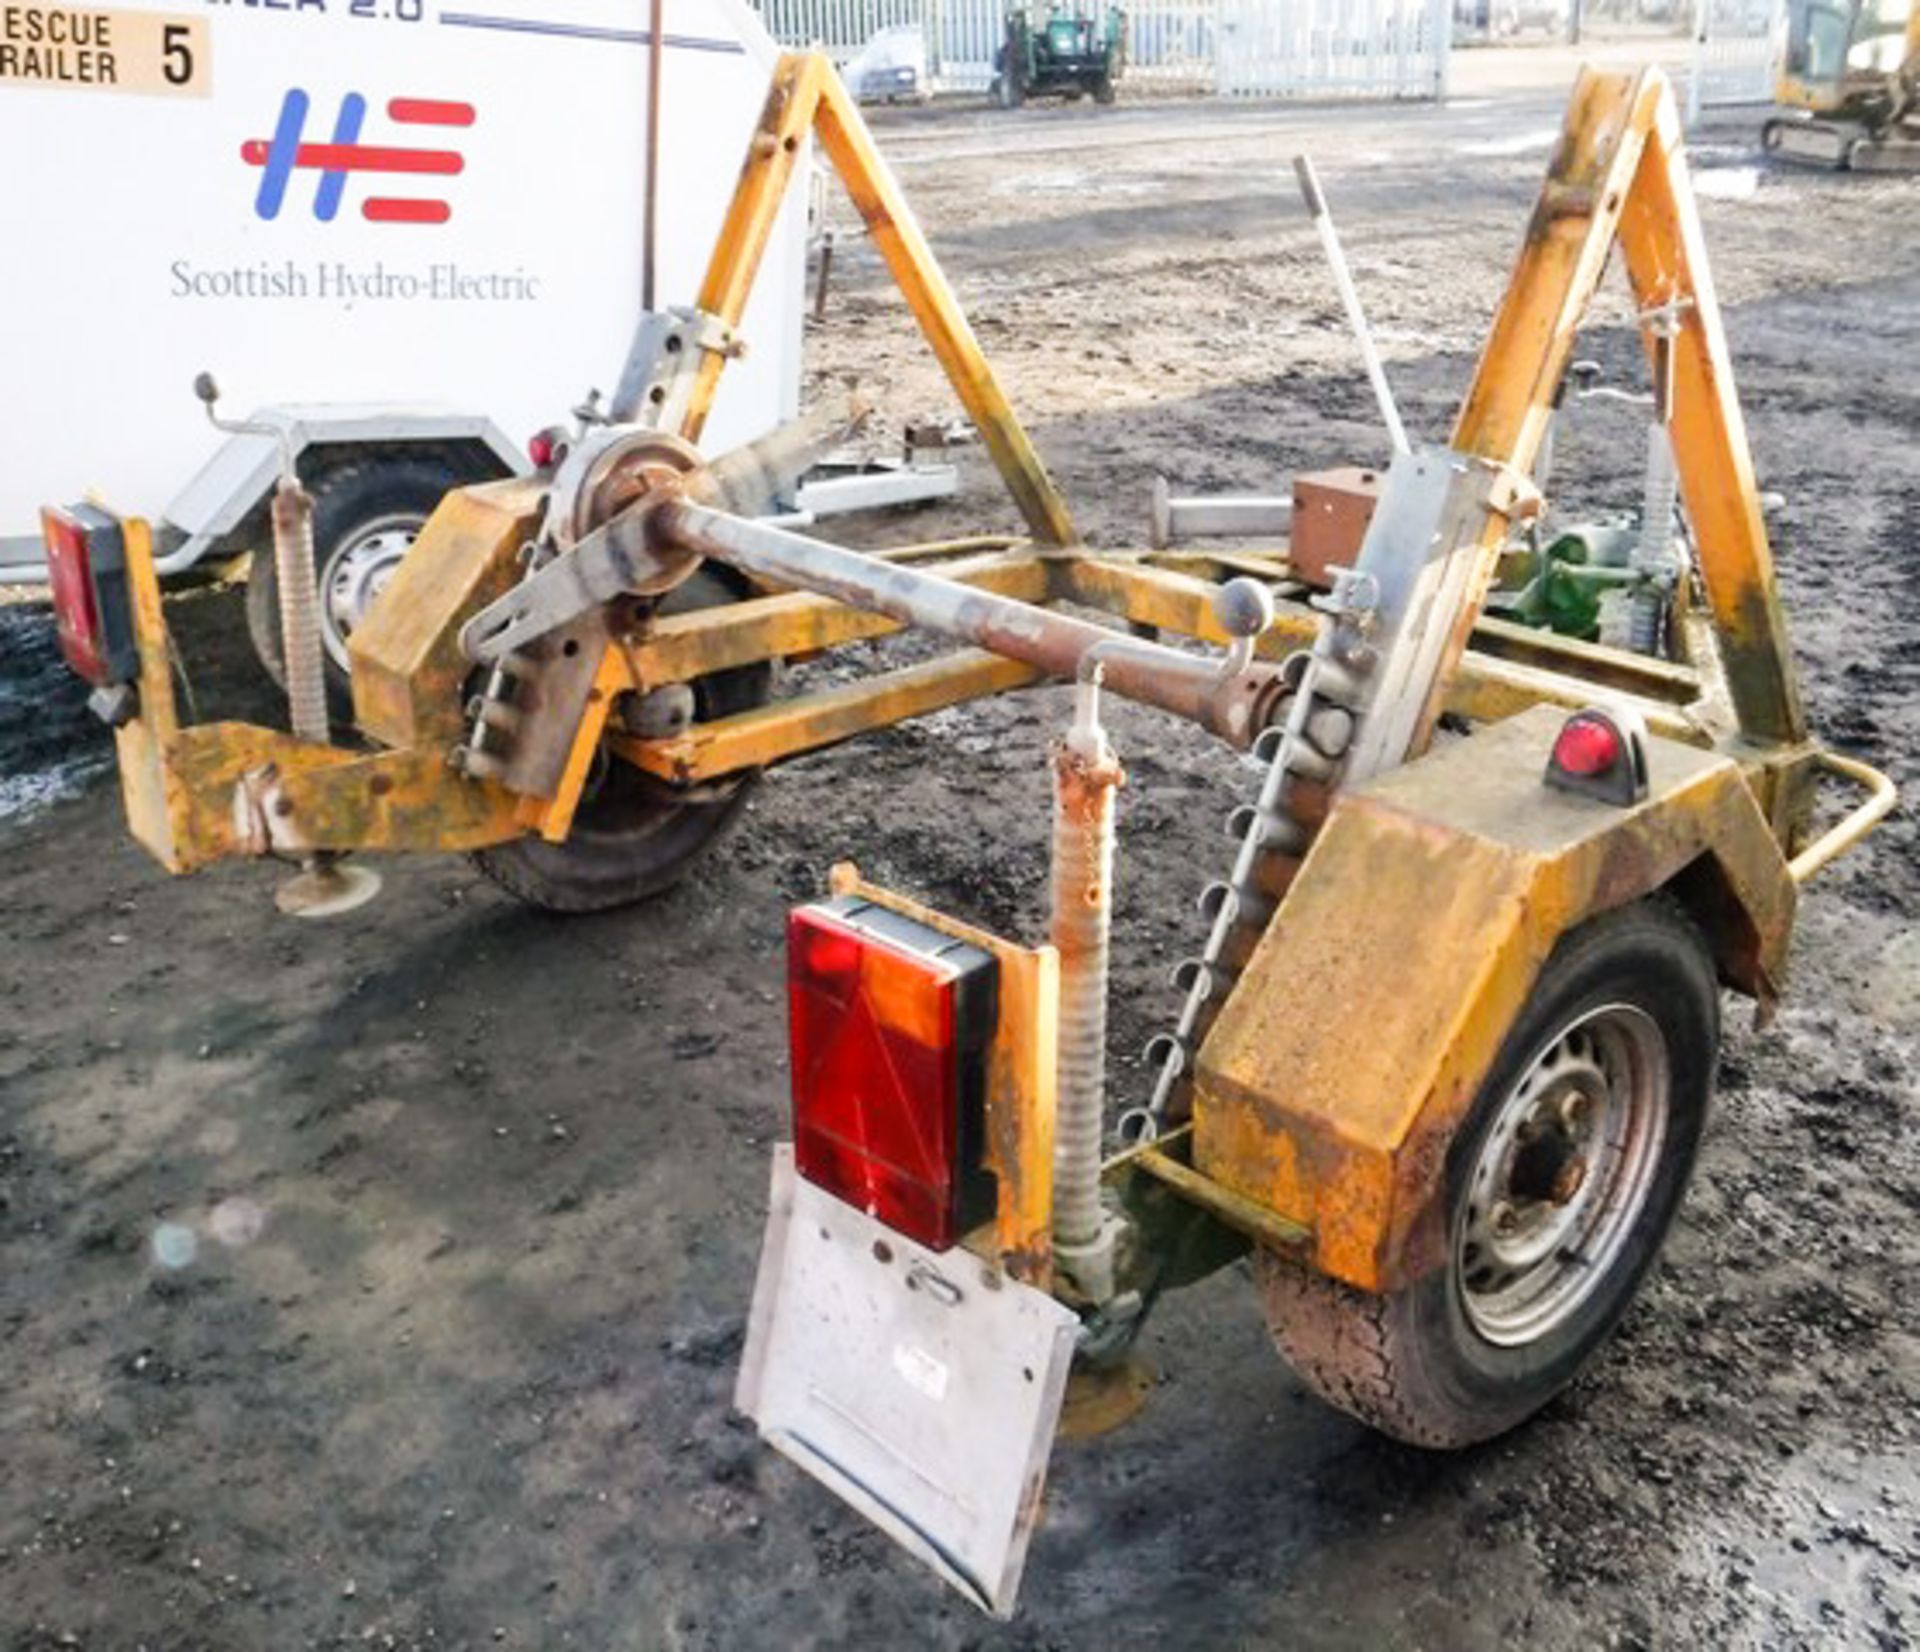 2007 CABLE TRAILER, TYPE G75110, GROSS TRAILER WEIGHT 1350KG, CE MARKED, ASSET NO 758-7044 - Image 2 of 5